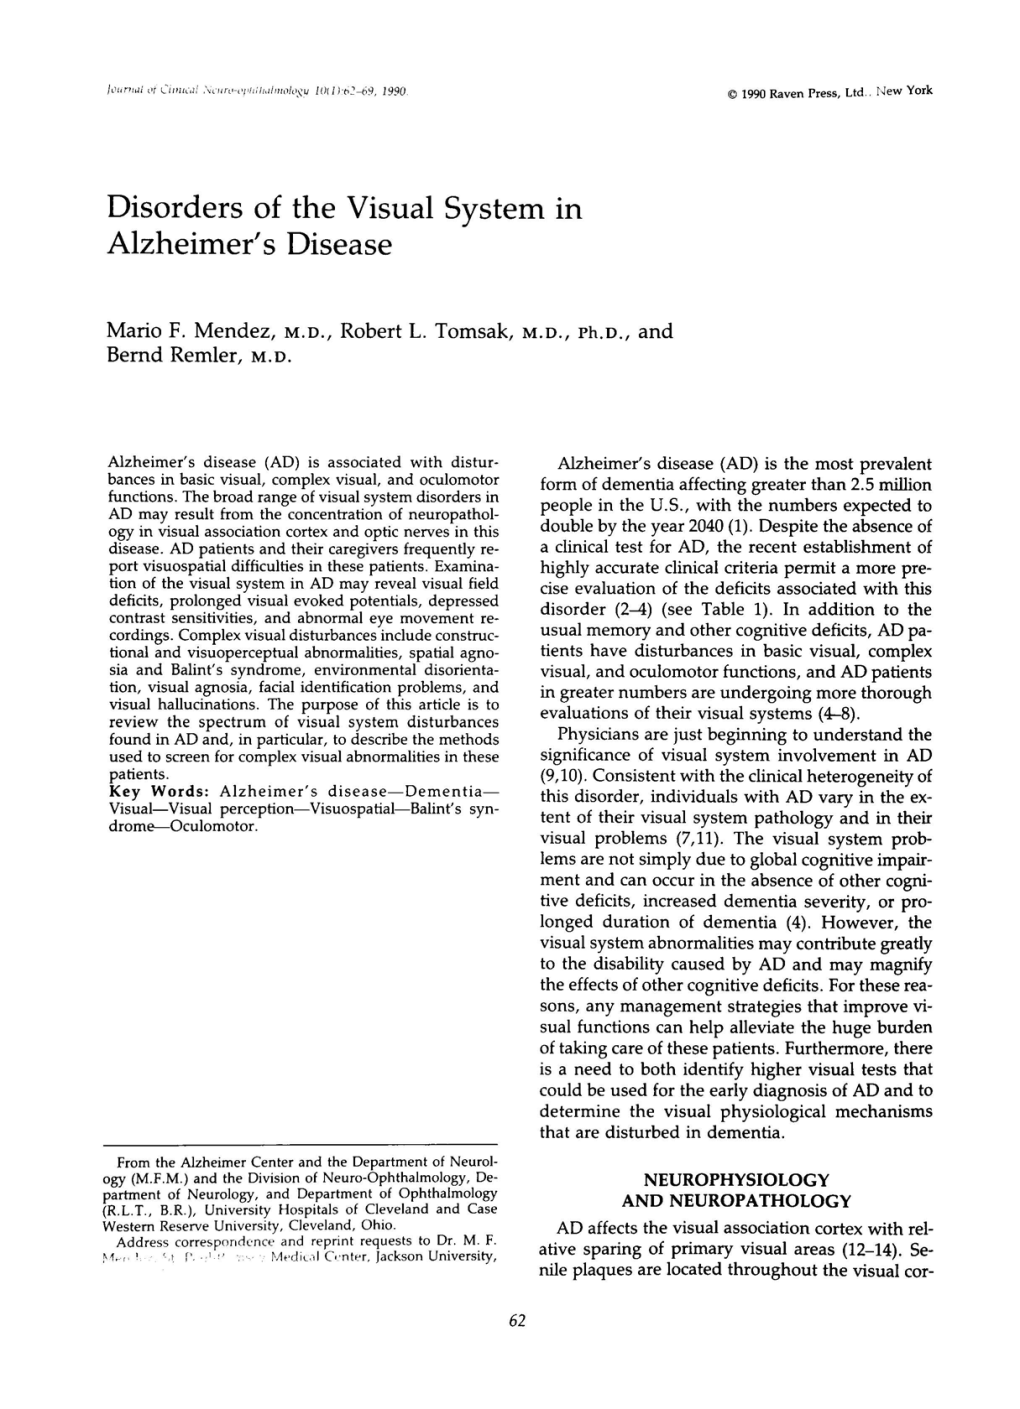 Disorders of the Visual System in Alzheimer's Disease